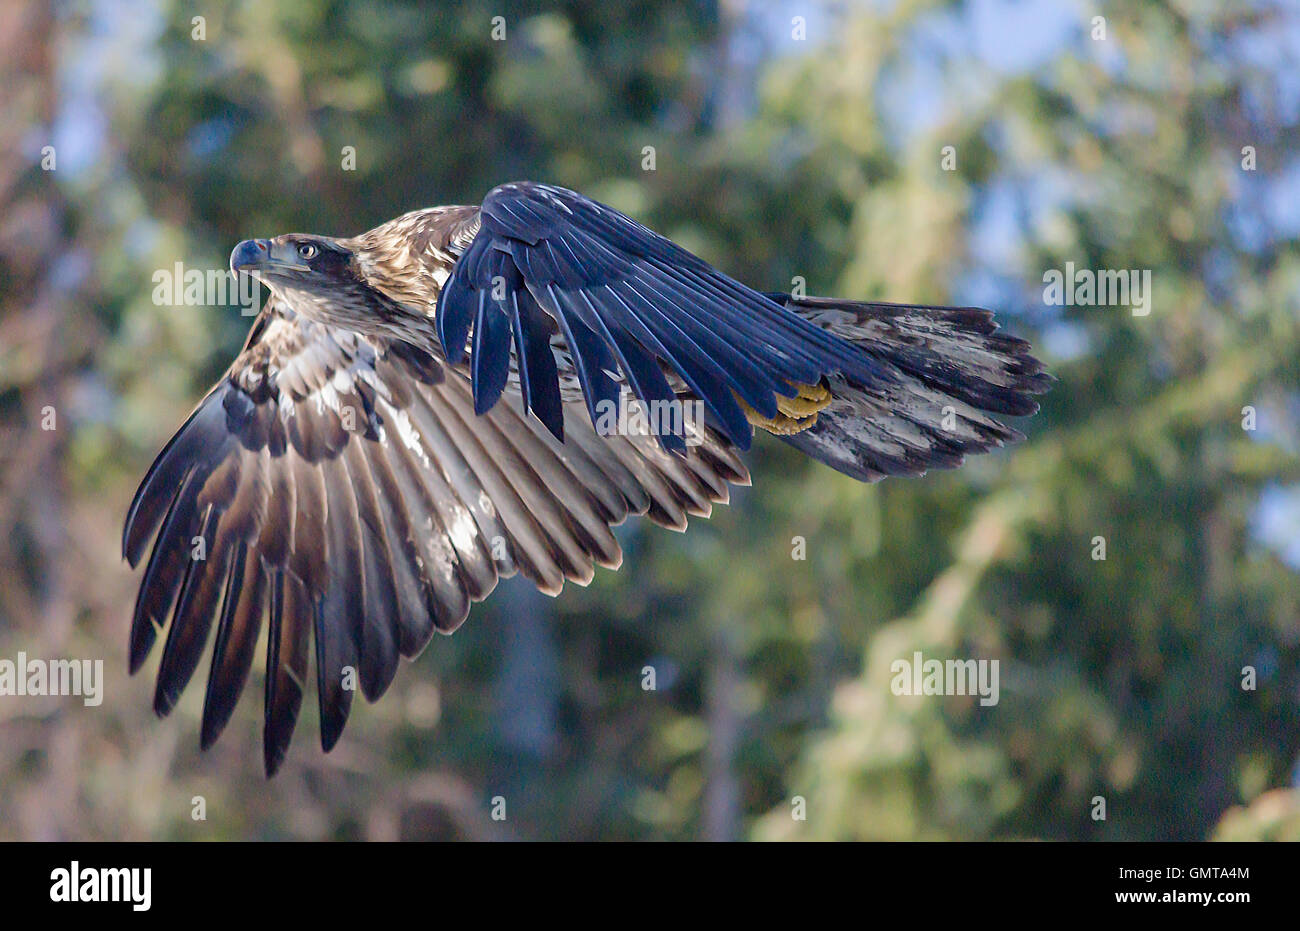 An immature Bald Eagle glides right to left across a forest background Stock Photo